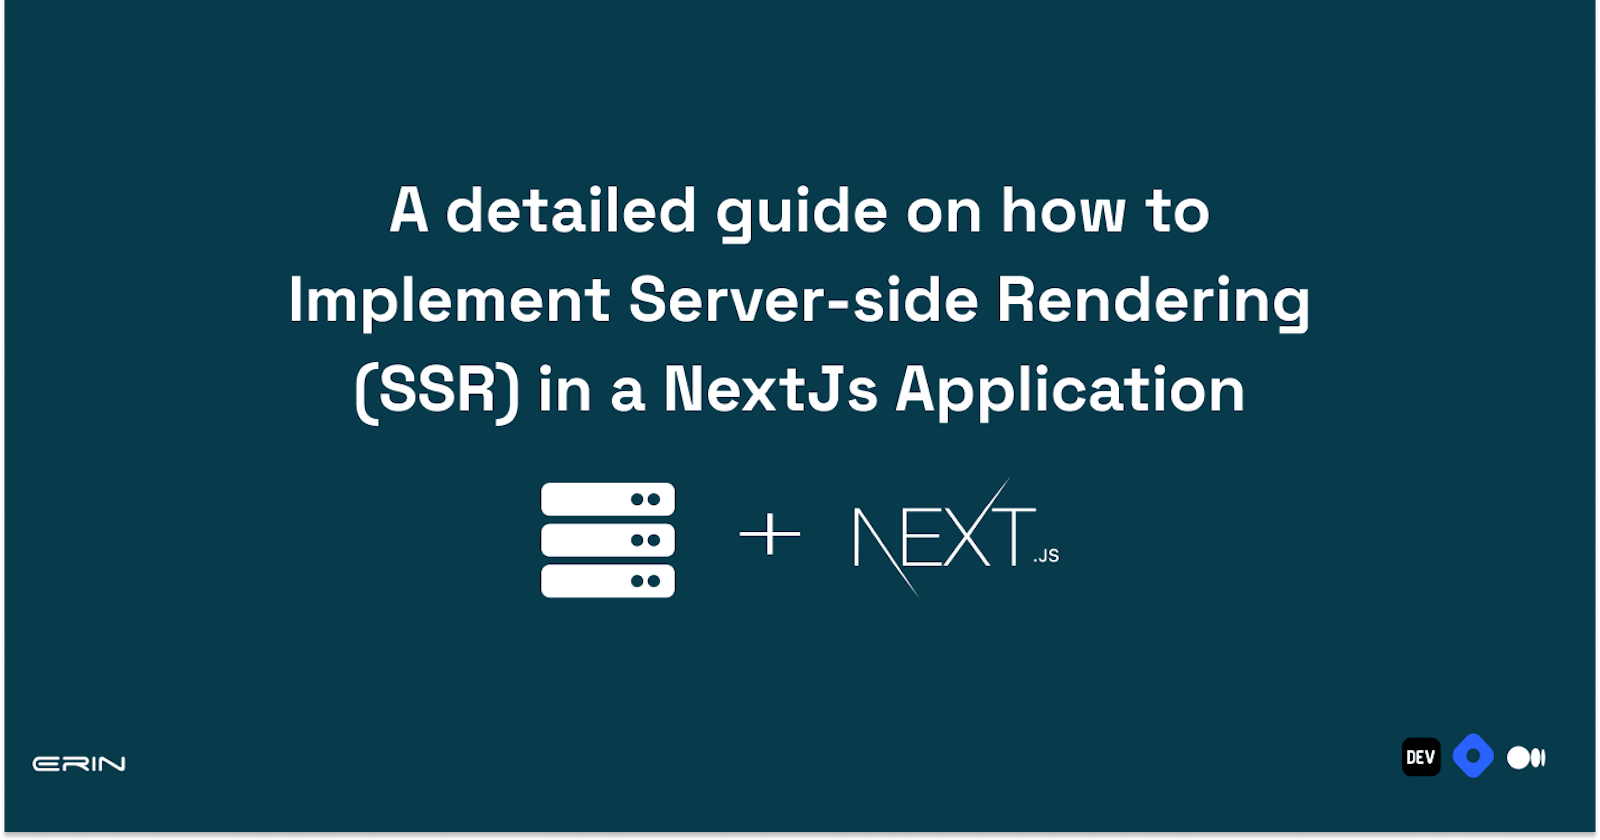 A detailed guide on how to implement Server-side Rendering (SSR) in a NextJs application